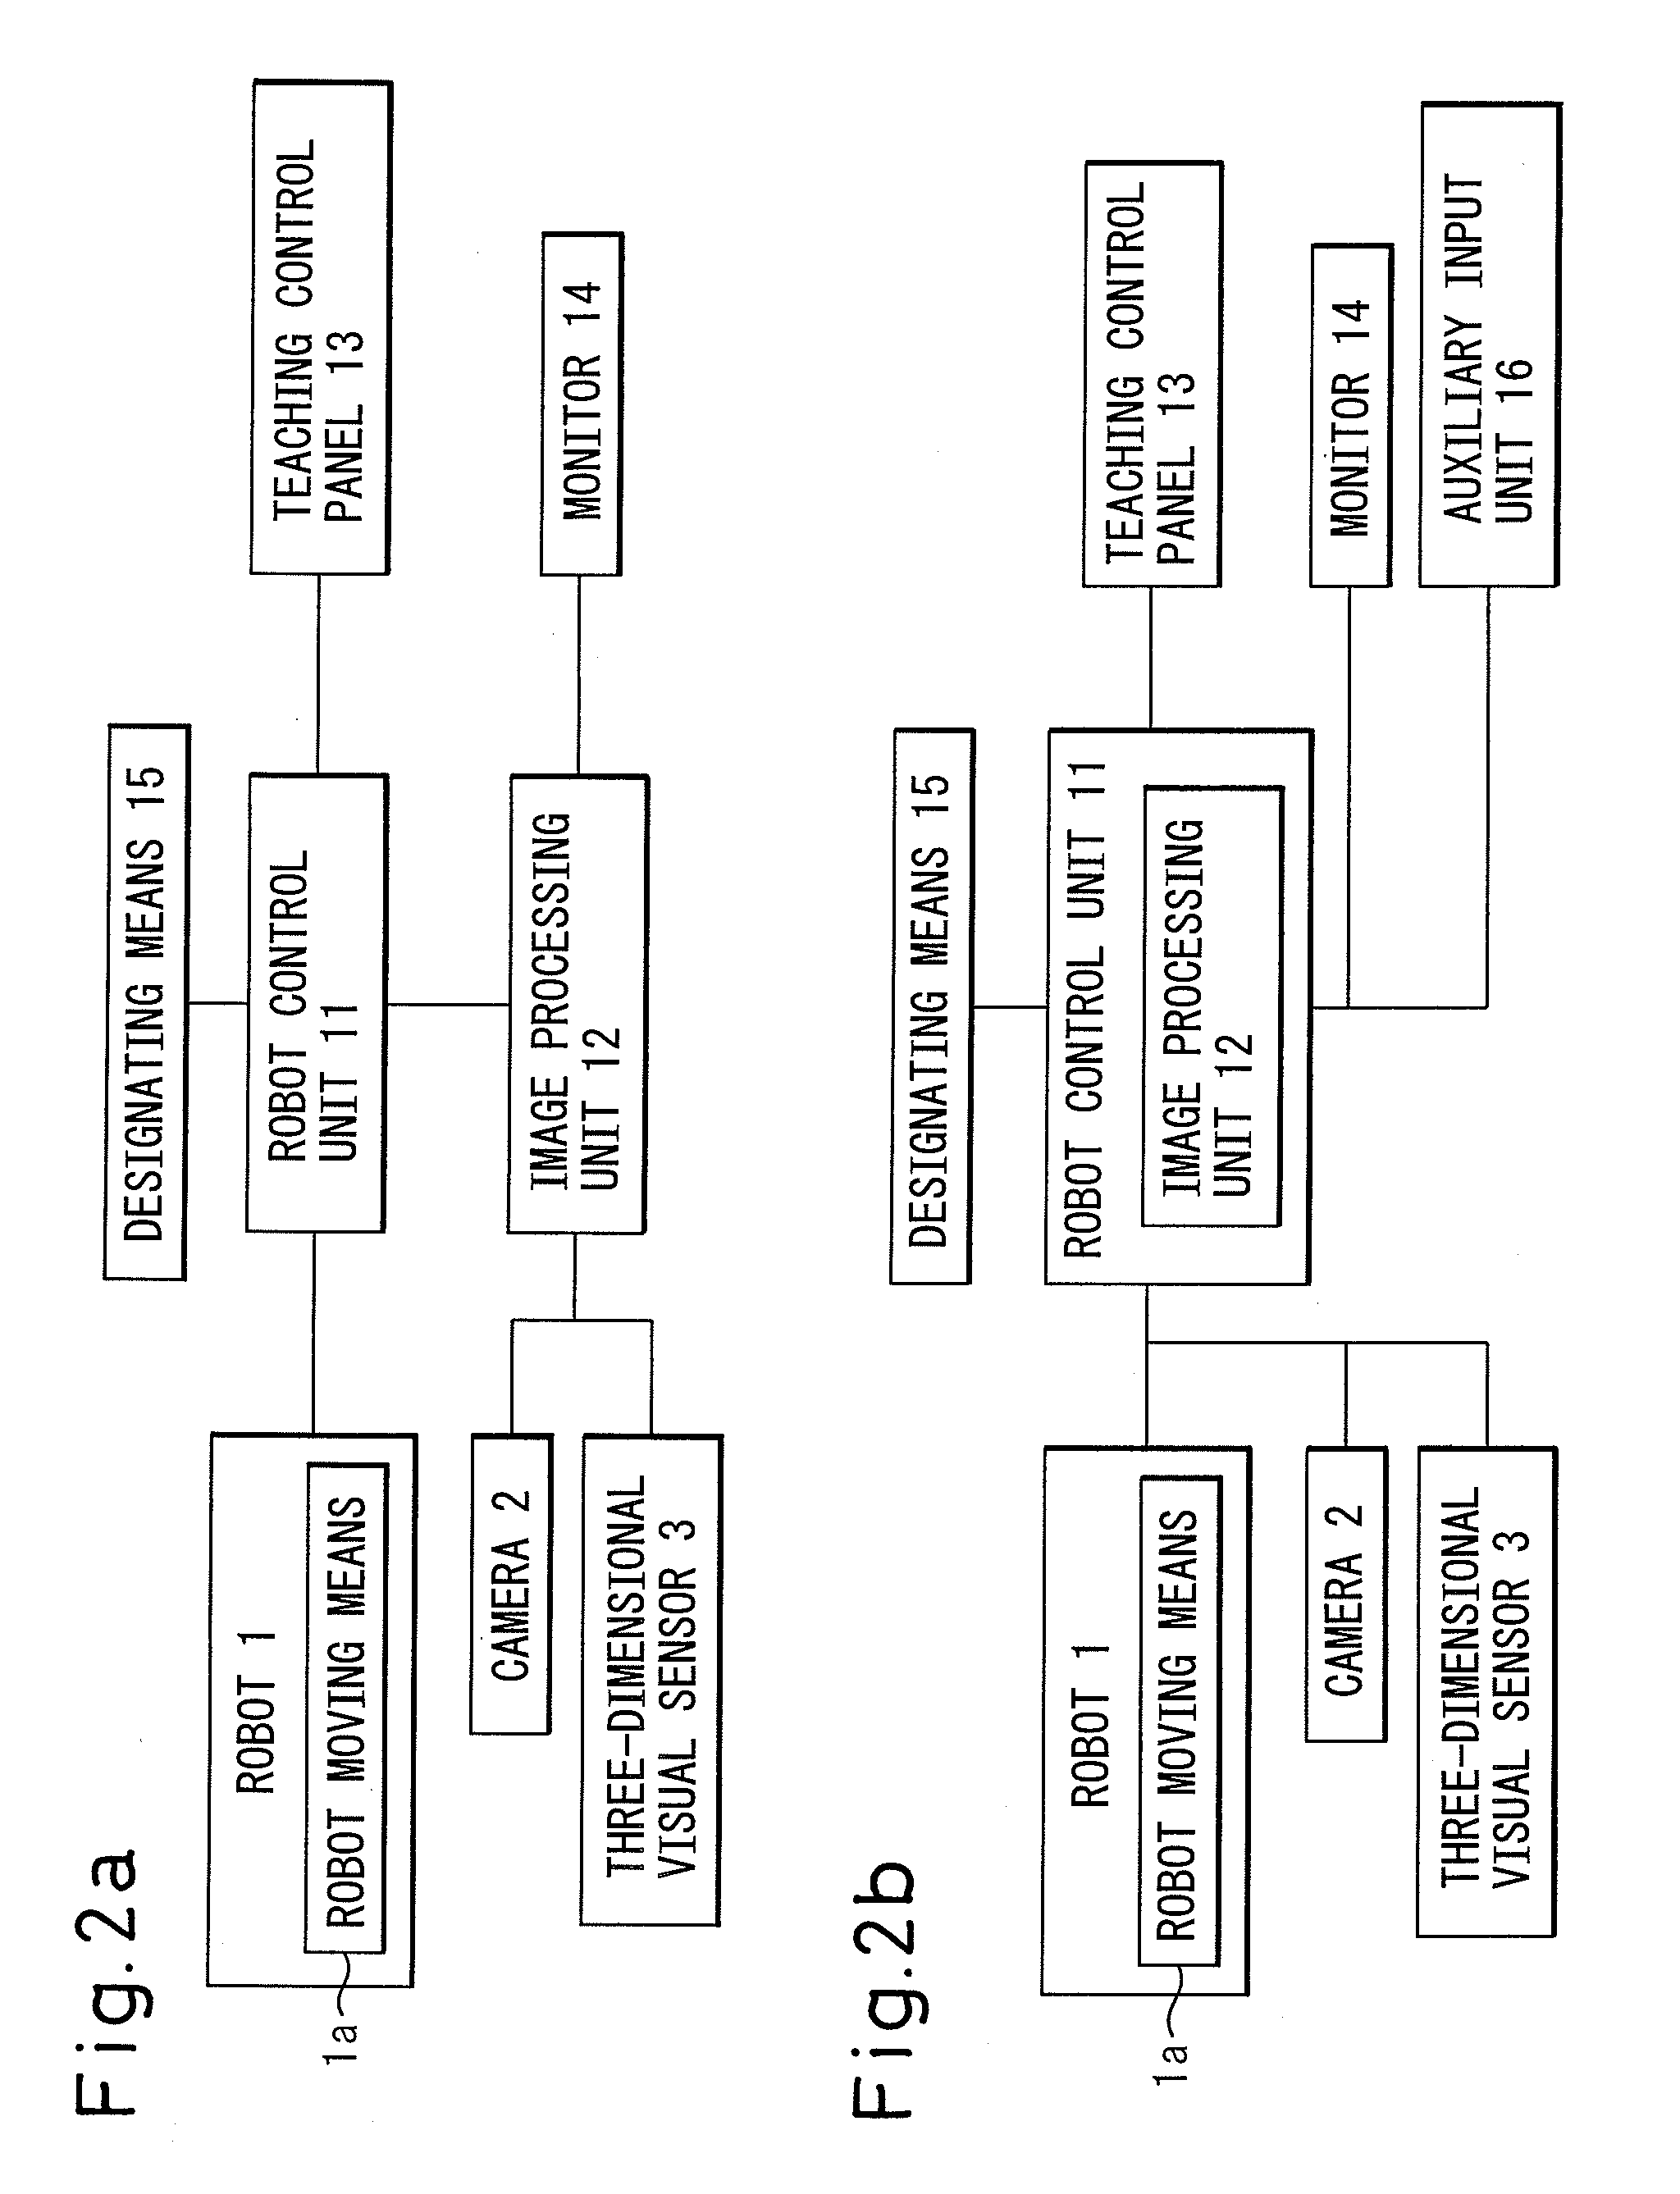 Apparatus for picking up objects